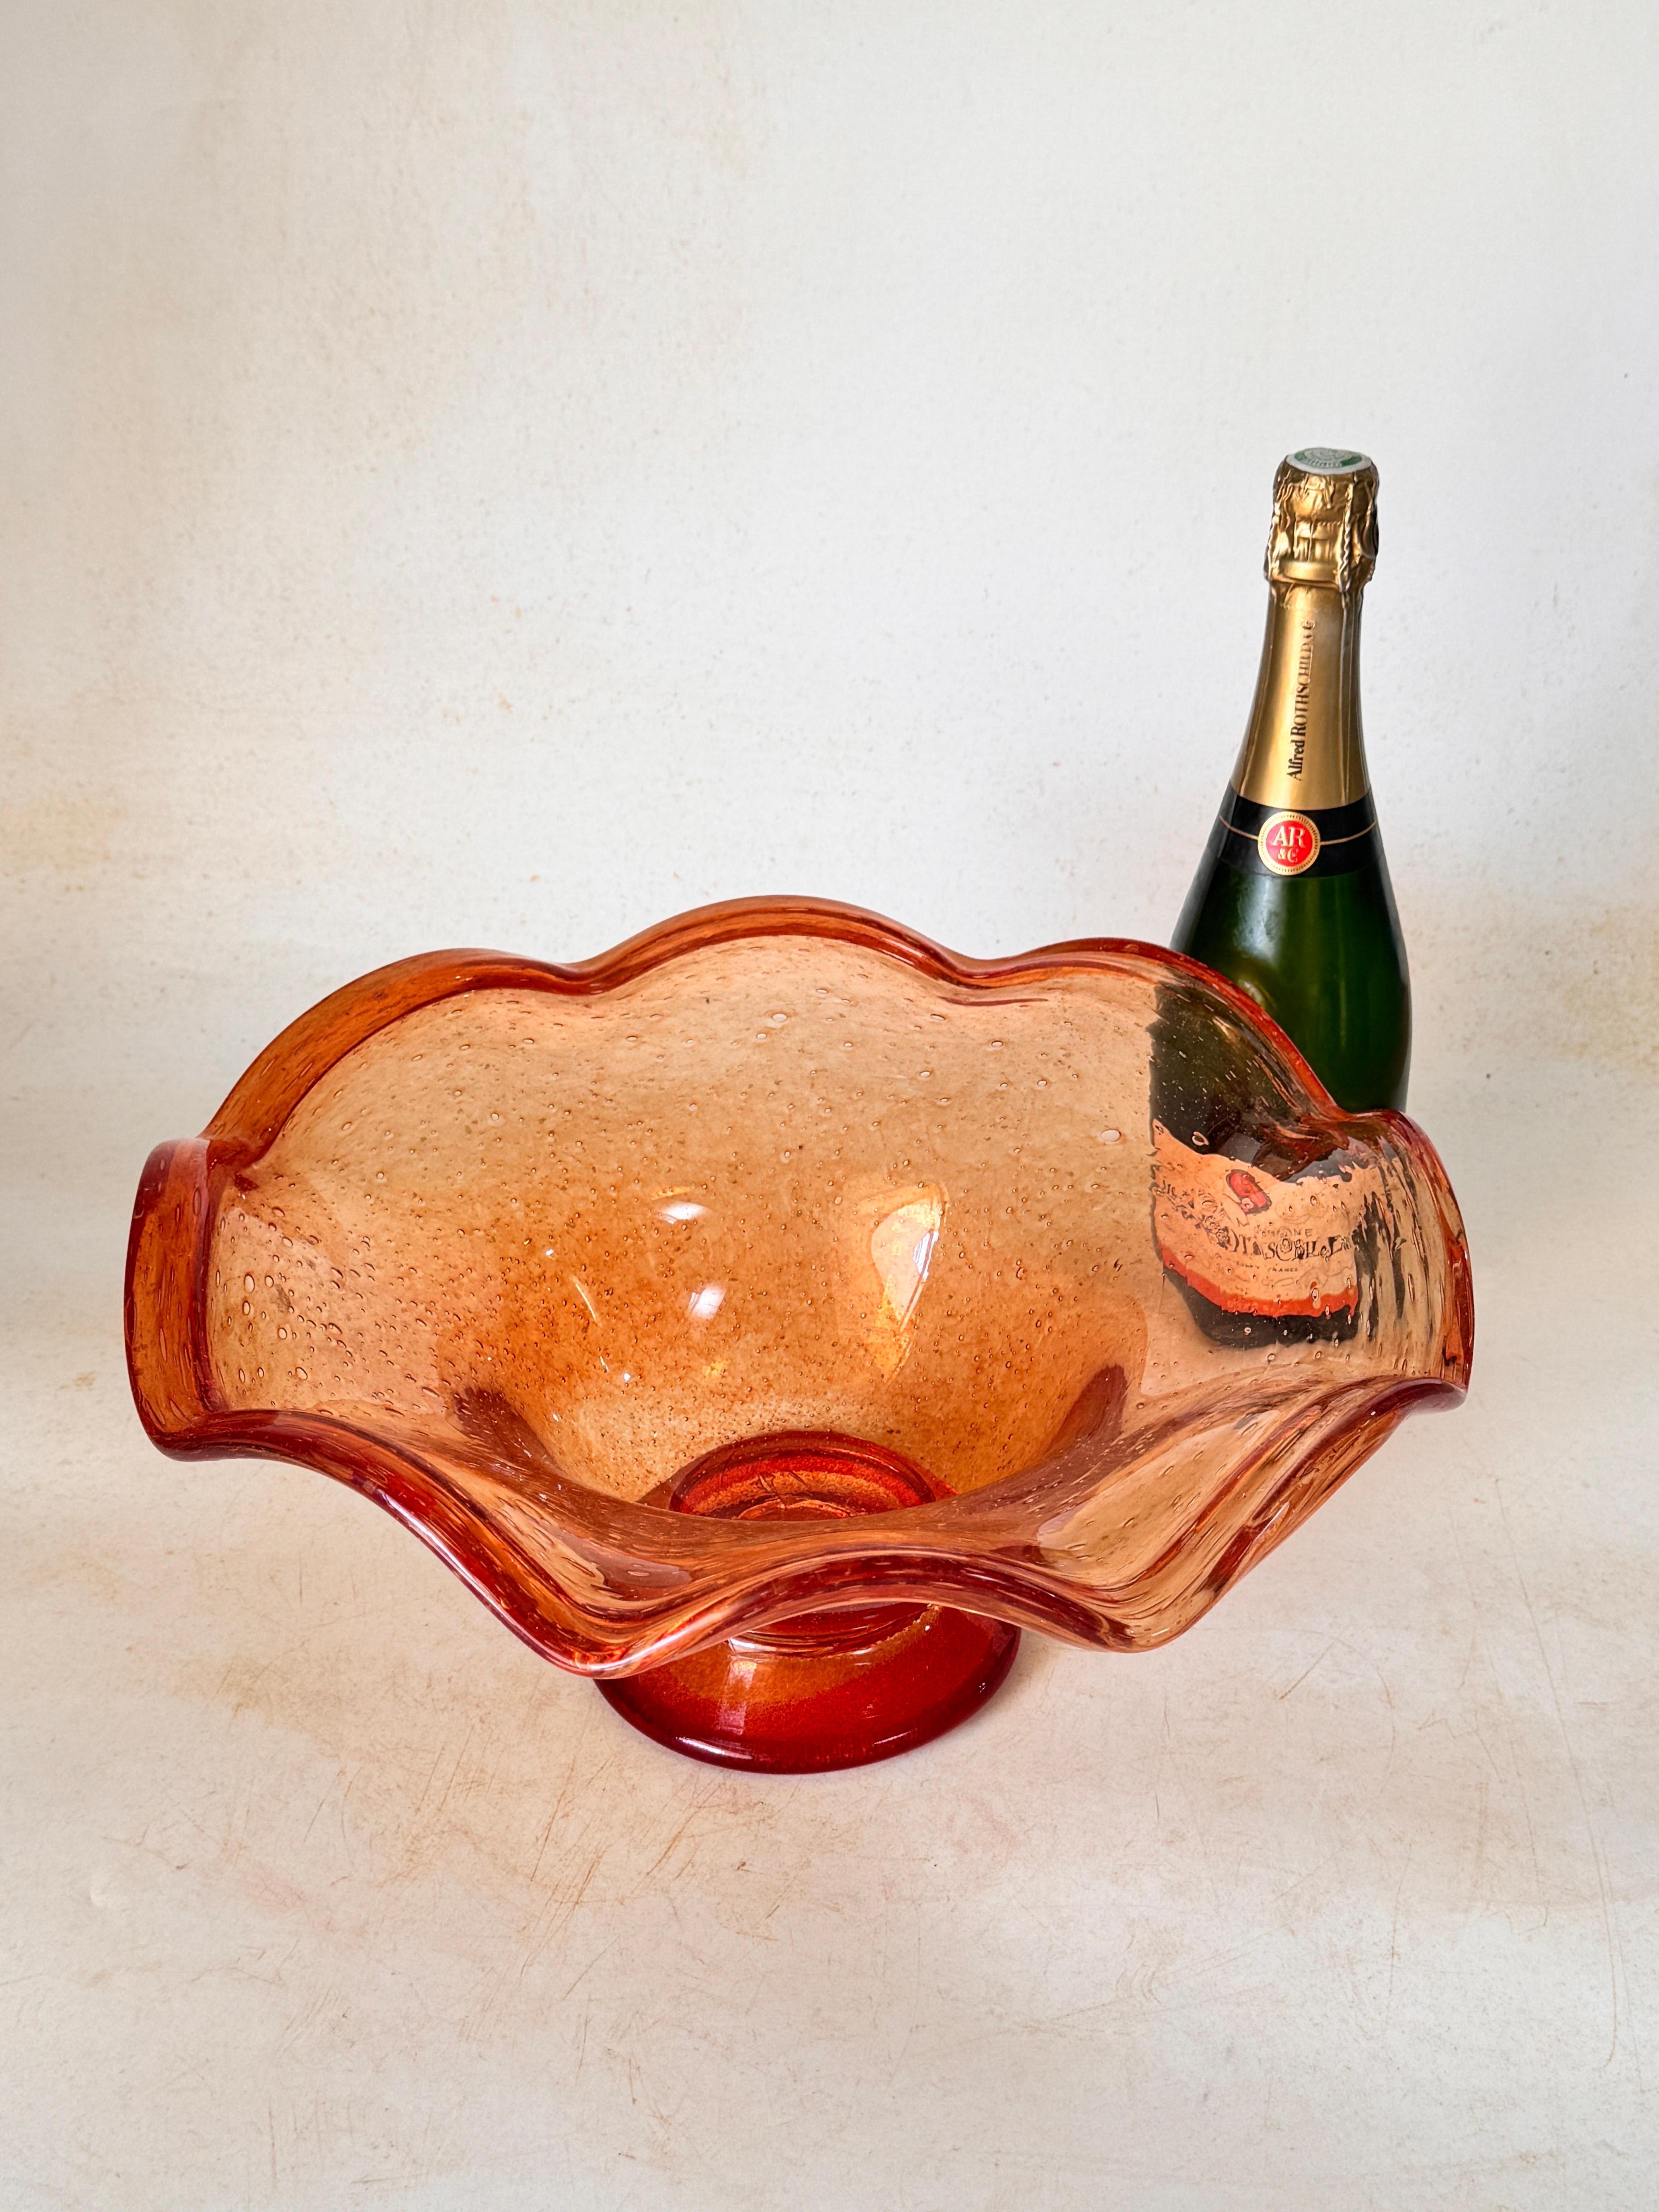 1960, fruit bowl, centerpiece or vide poche, in this beautiful Biot glass, well-known glass firm of the south of France near Vallauris.
Orange and Red Color.